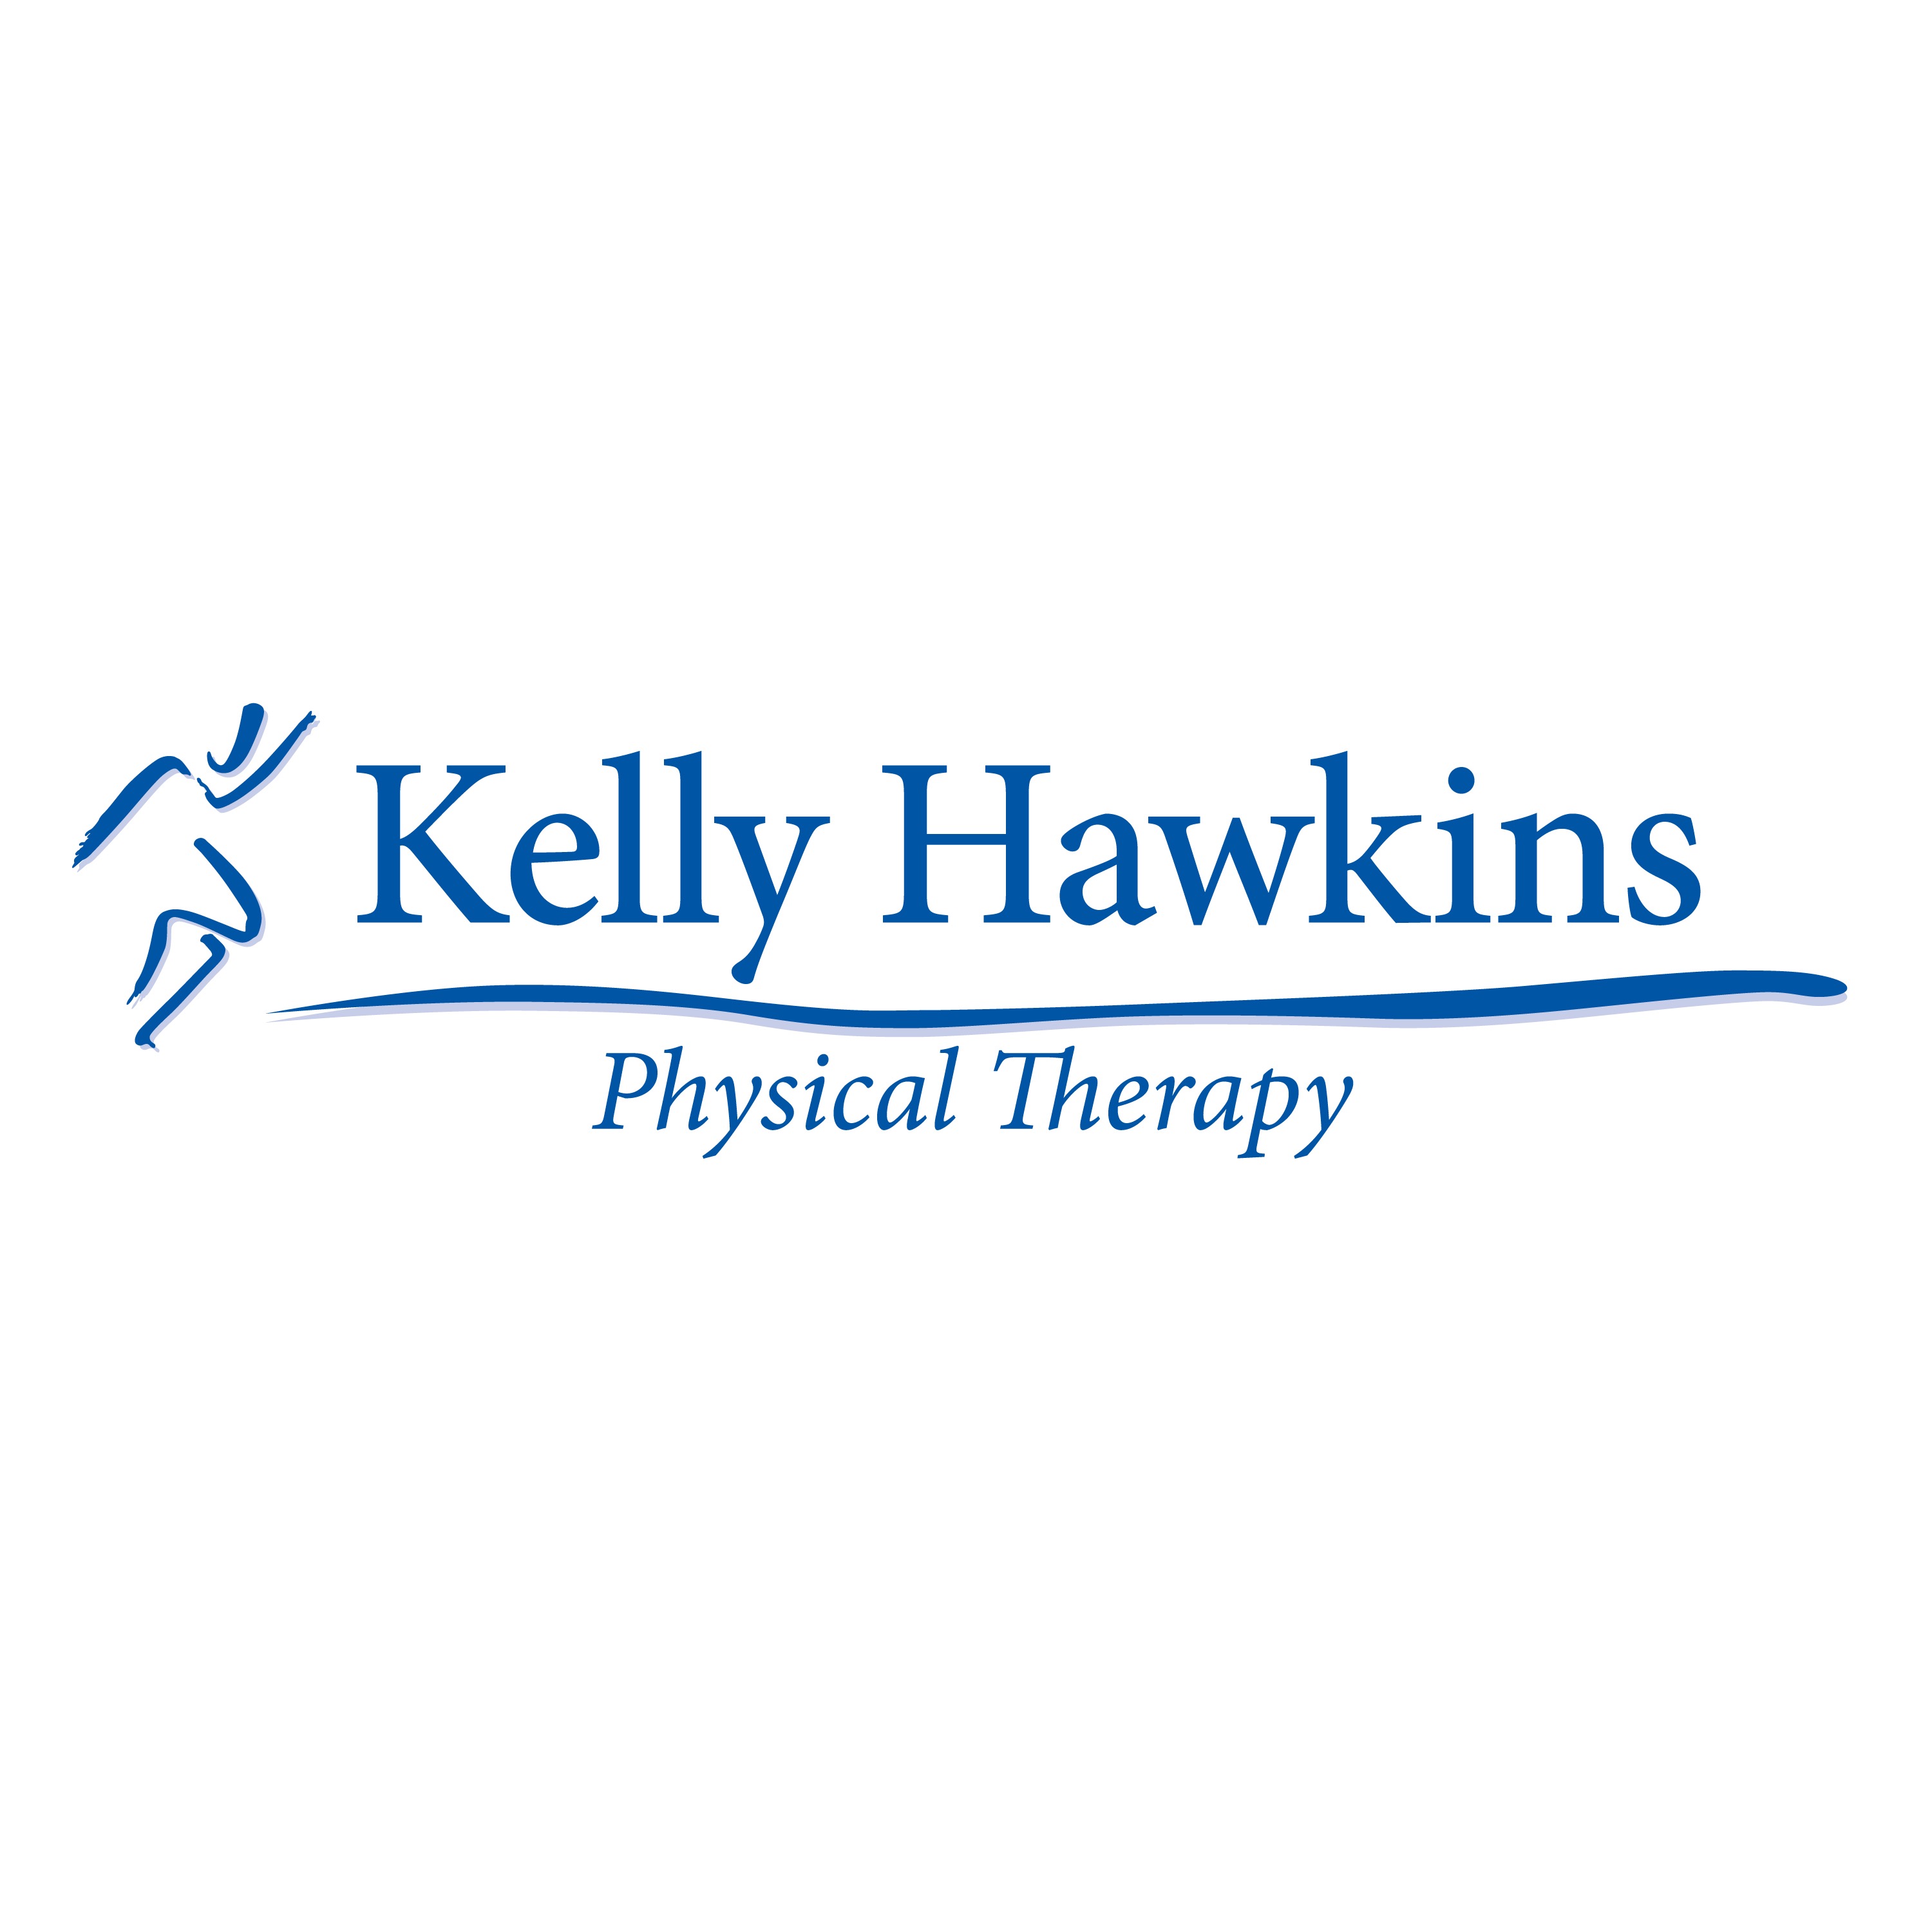 Kelly Hawkins Physical Therapy - Las Vegas, Valley View